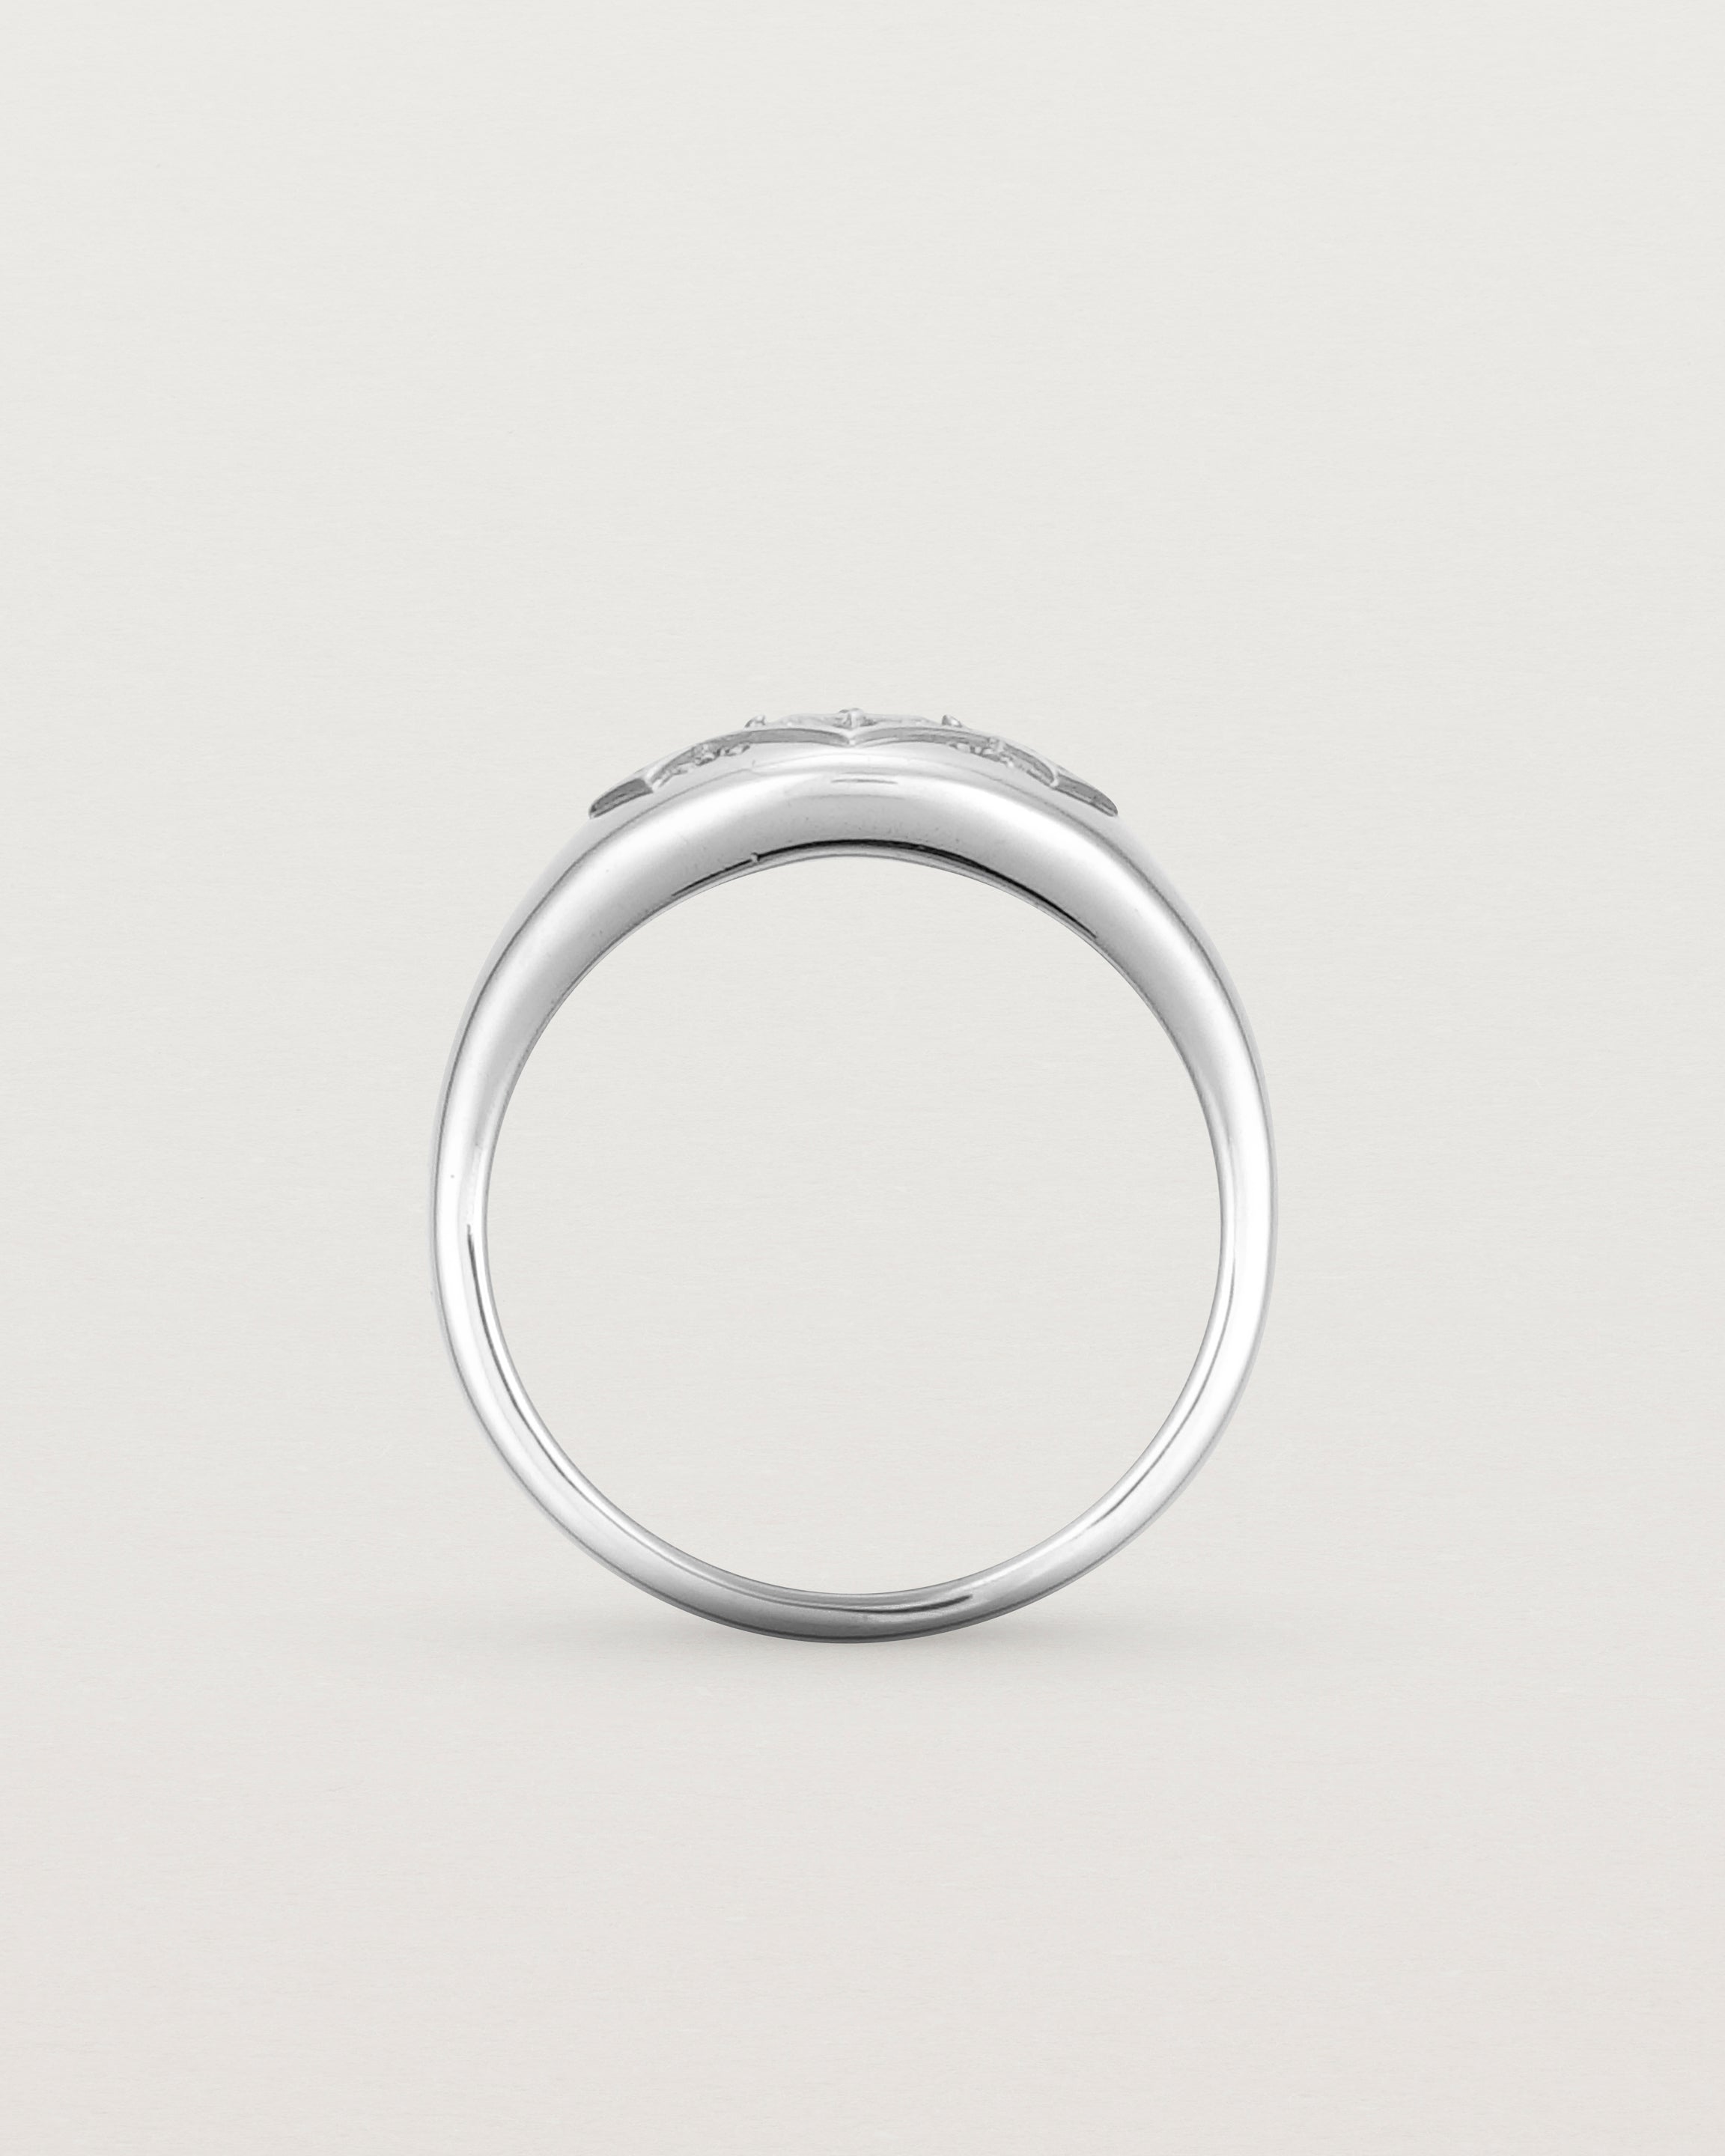 Standing view of the Seule Cheri Ring | Diamonds | white Gold.